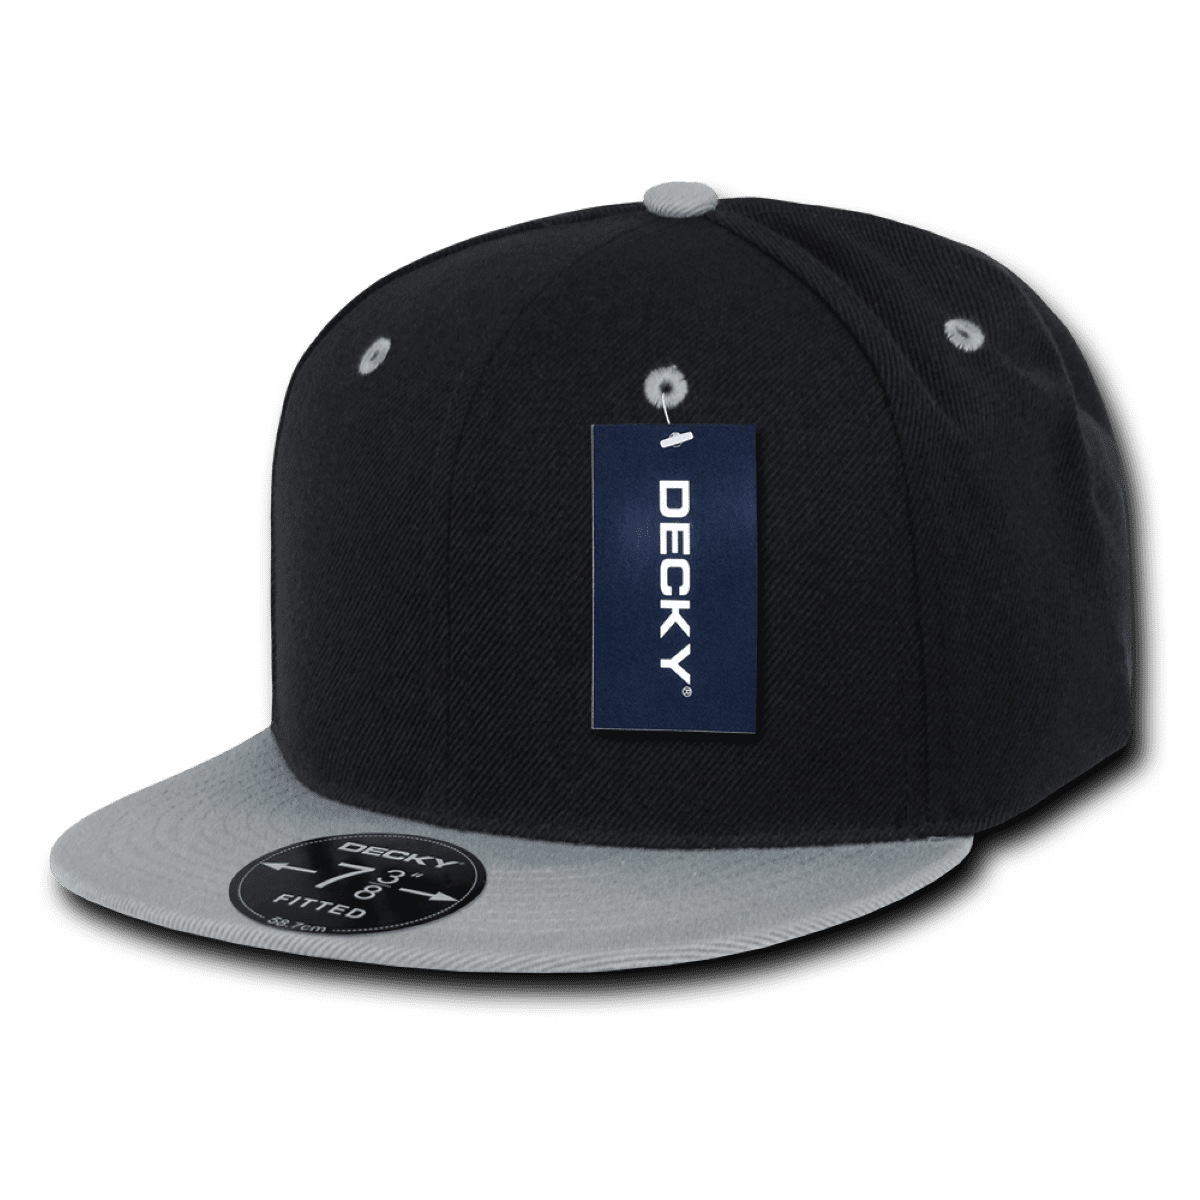 DECKY Retro Fitted Cap